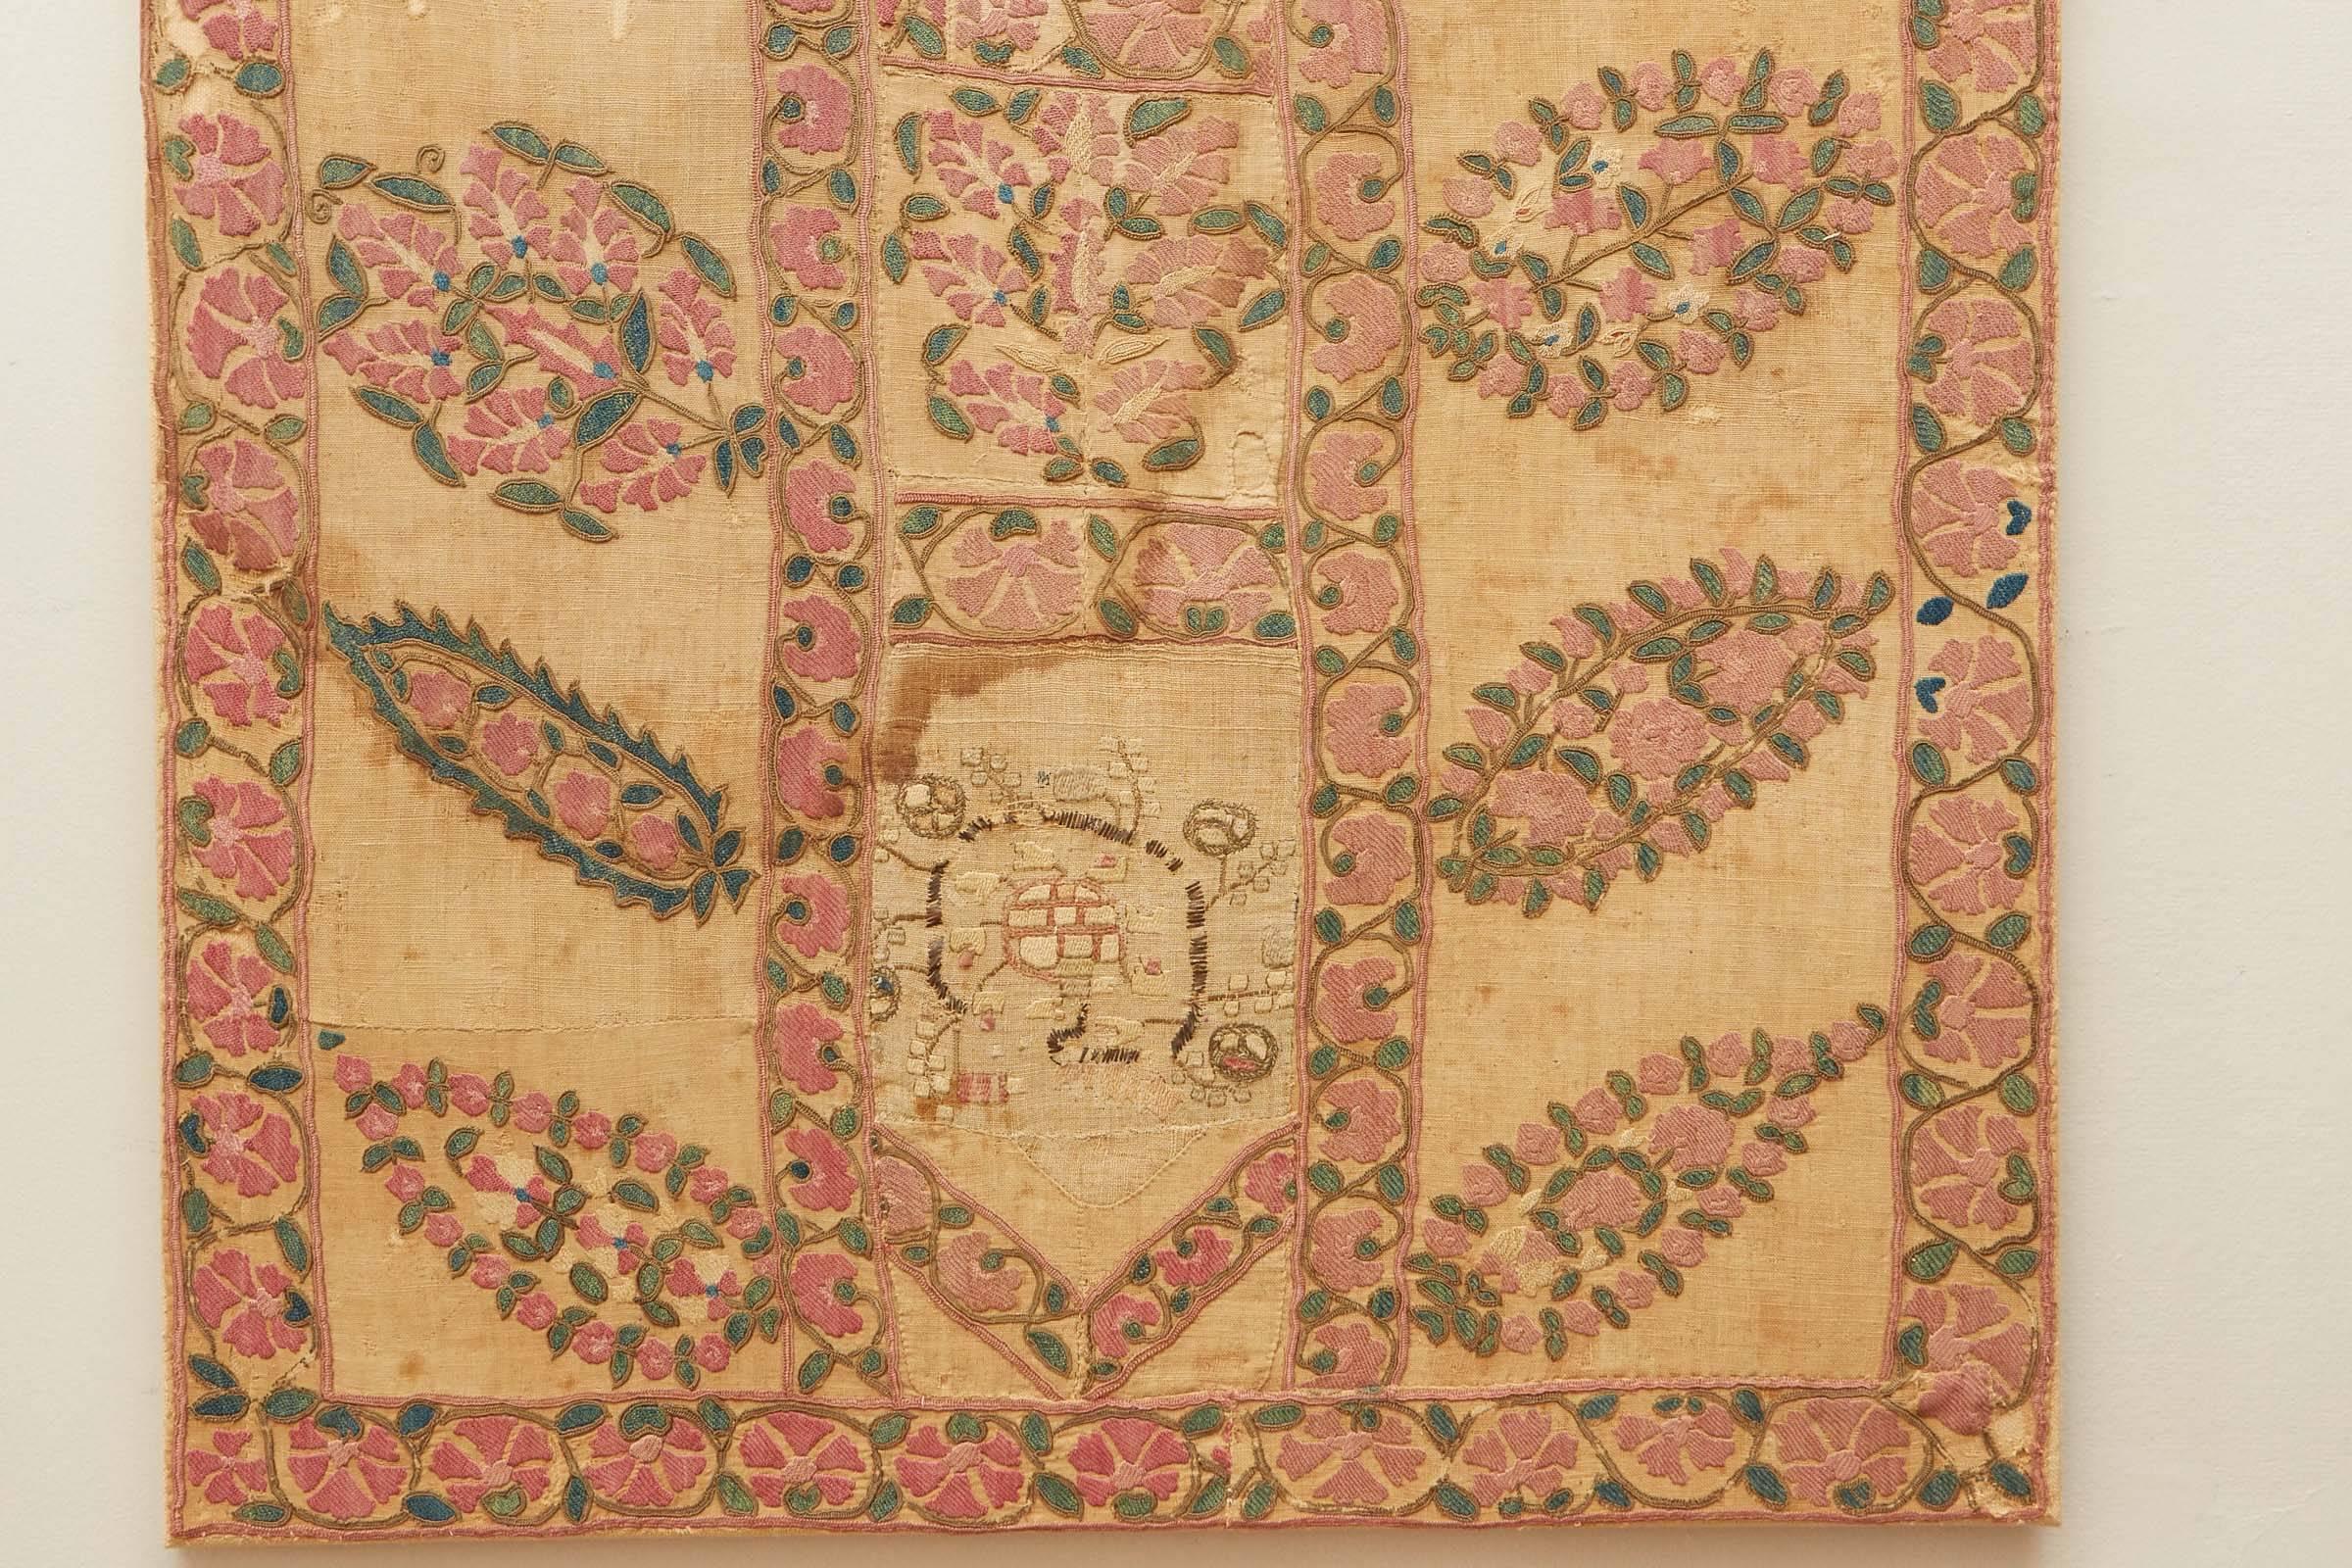 Susani has been backed and mounted on a wood stretcher. Silk embroidery on hand woven linen. This is an early piece with quite a bit of distressing, some staining and patched areas. The patches are antique ottoman textile fragments. Very interesting